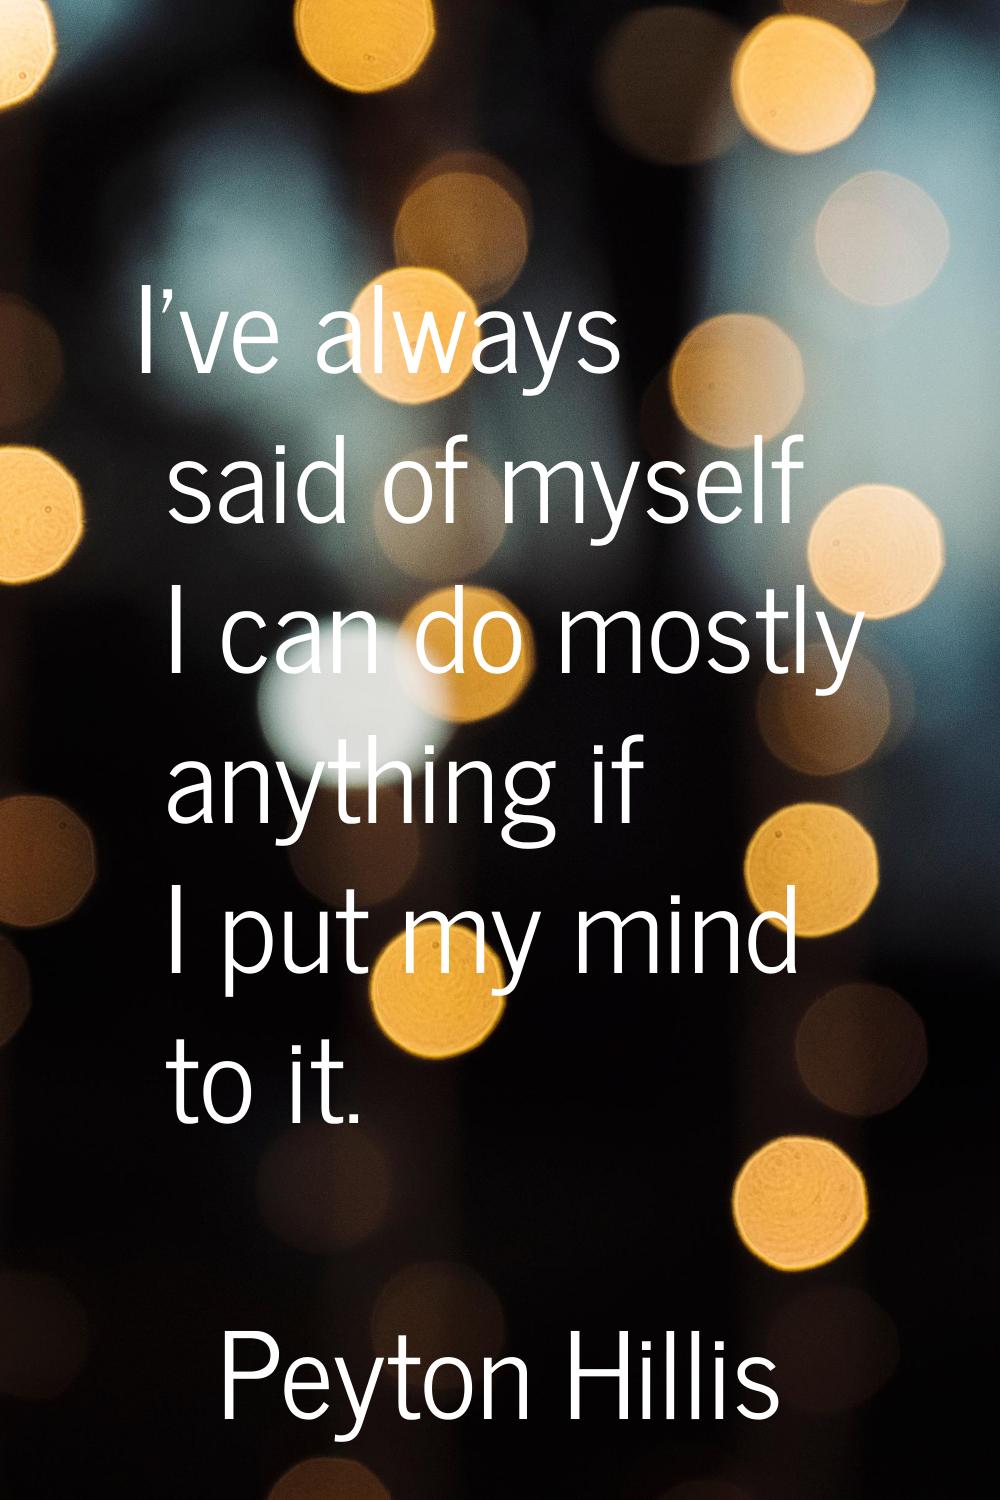 I've always said of myself I can do mostly anything if I put my mind to it.